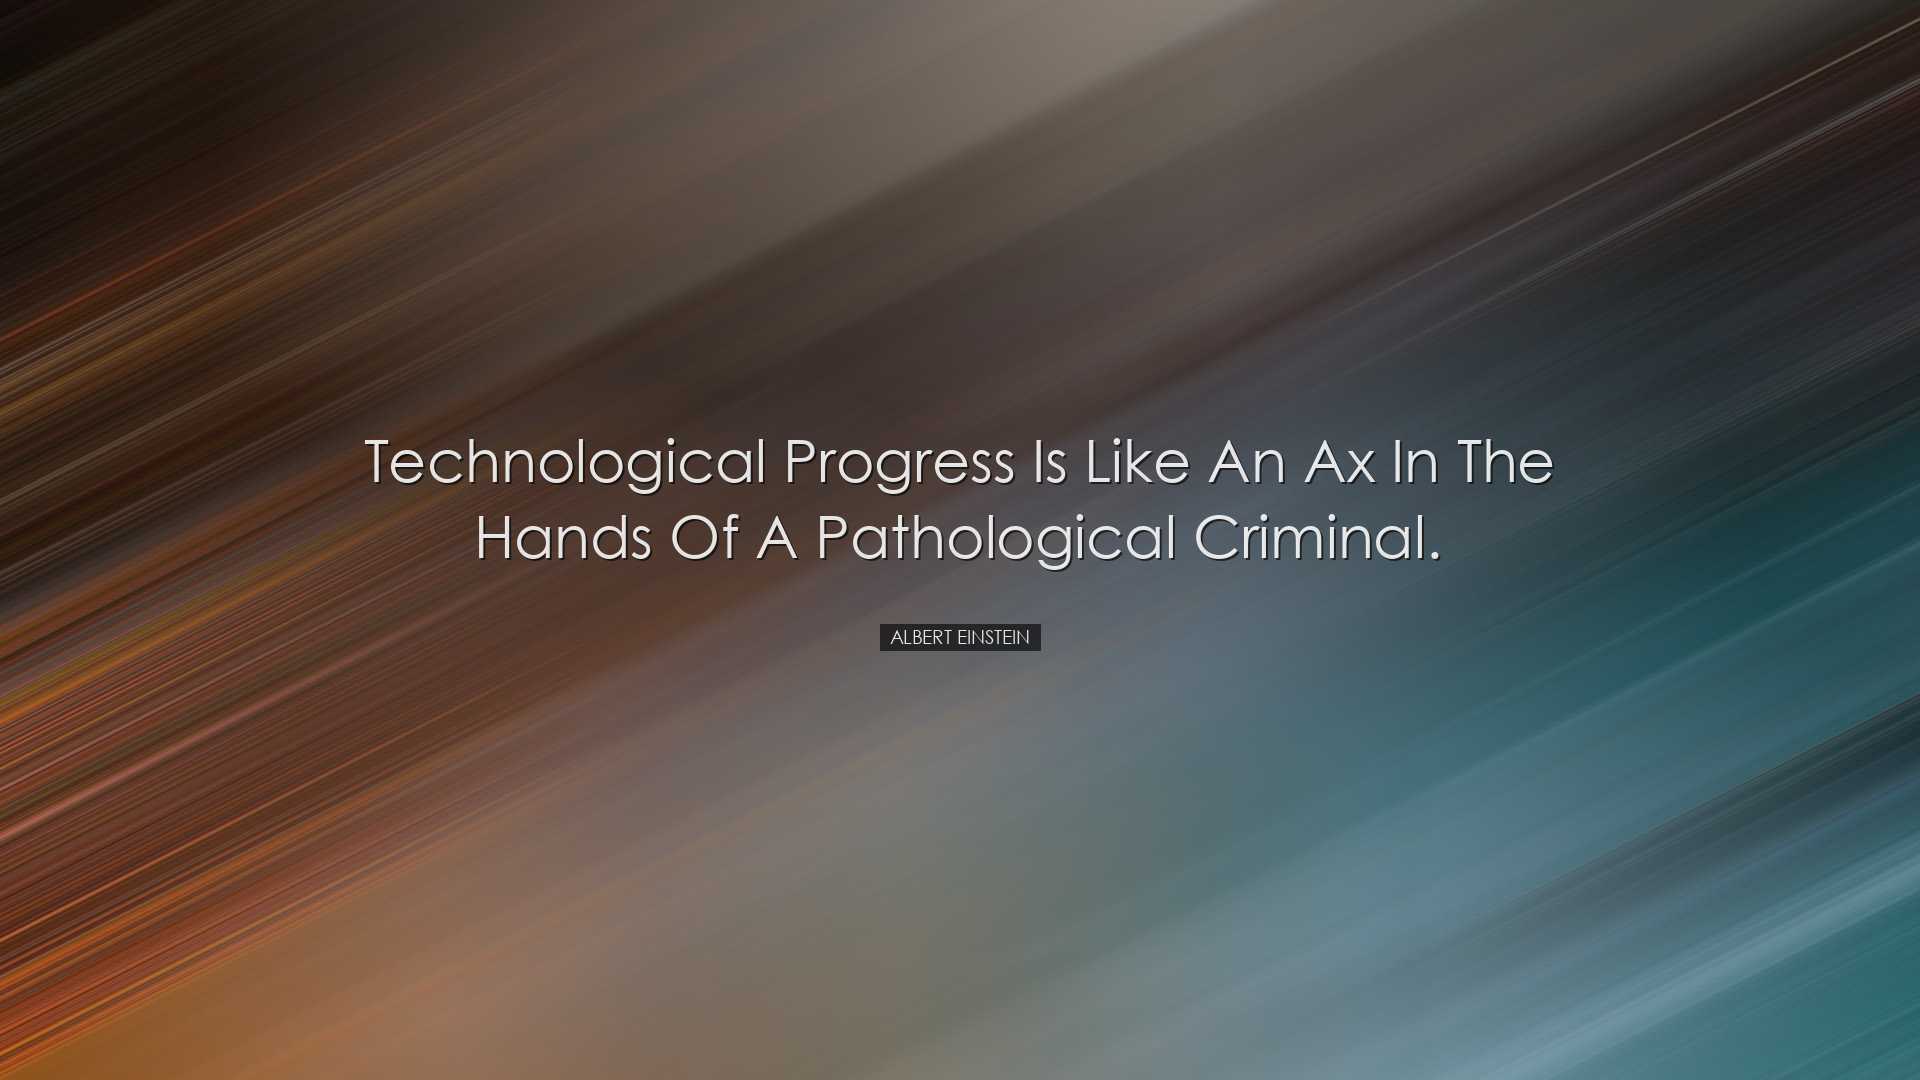 Technological progress is like an ax in the hands of a pathologica